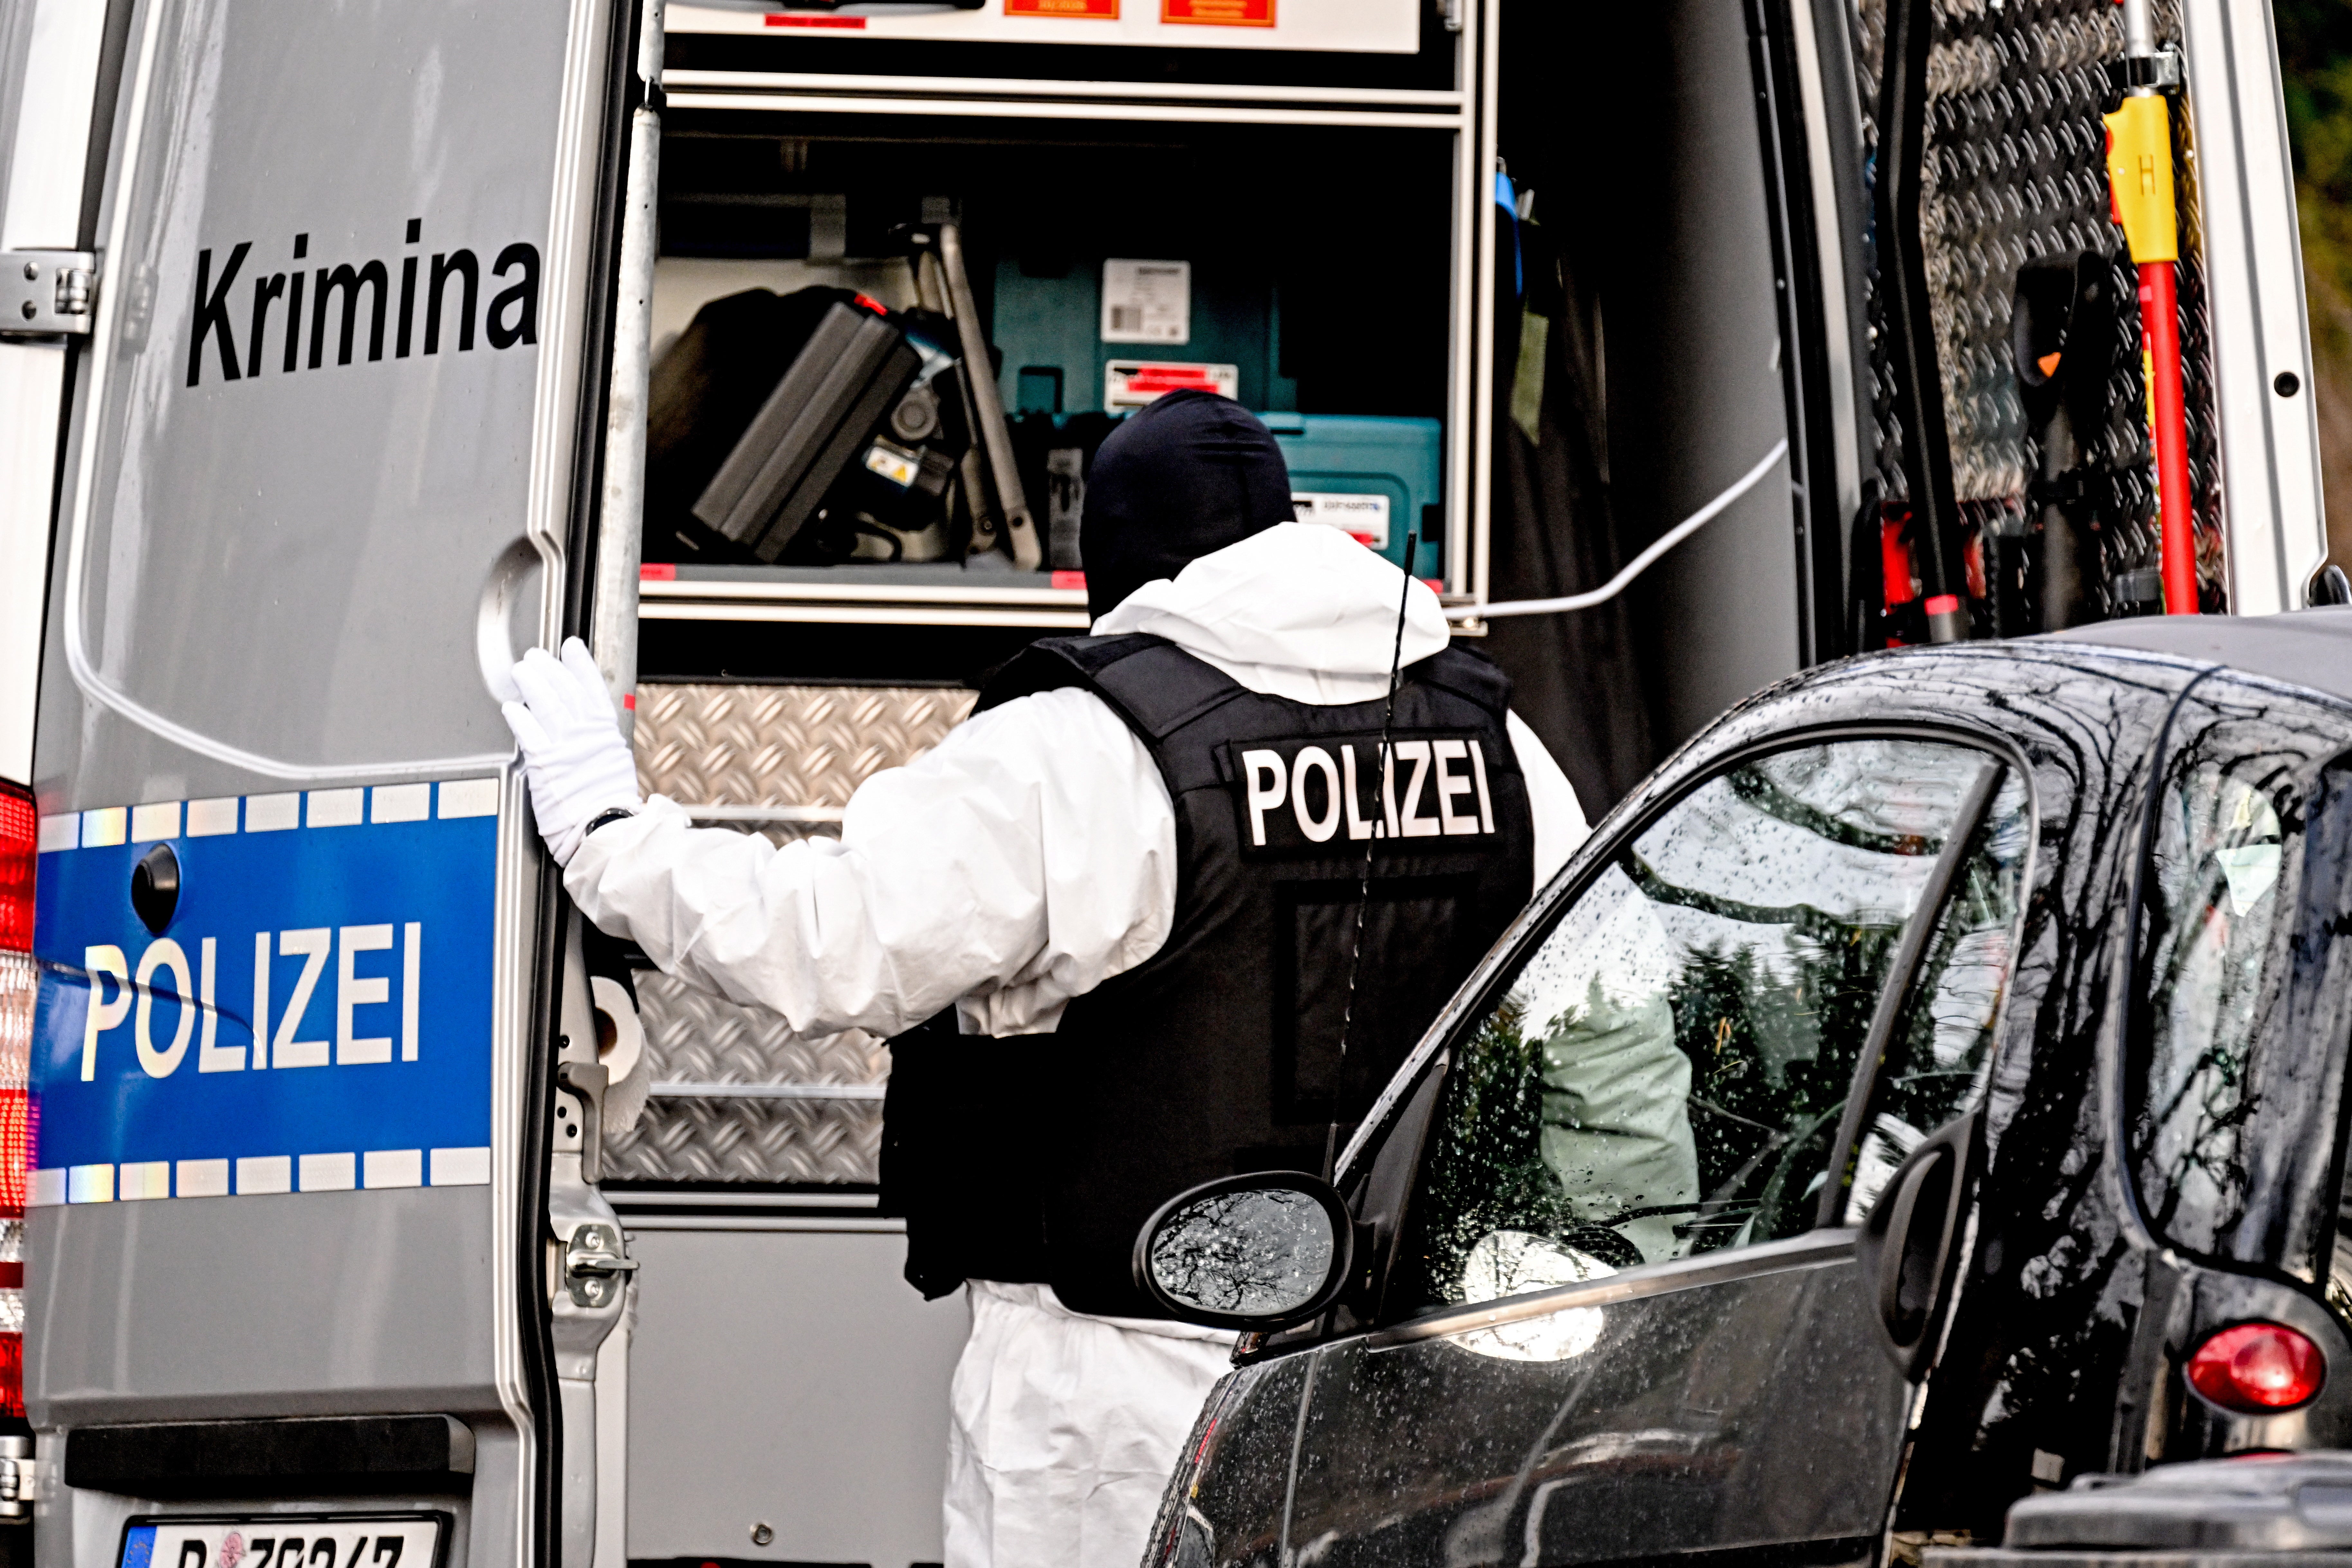 A police officer works during a raid in Berlin